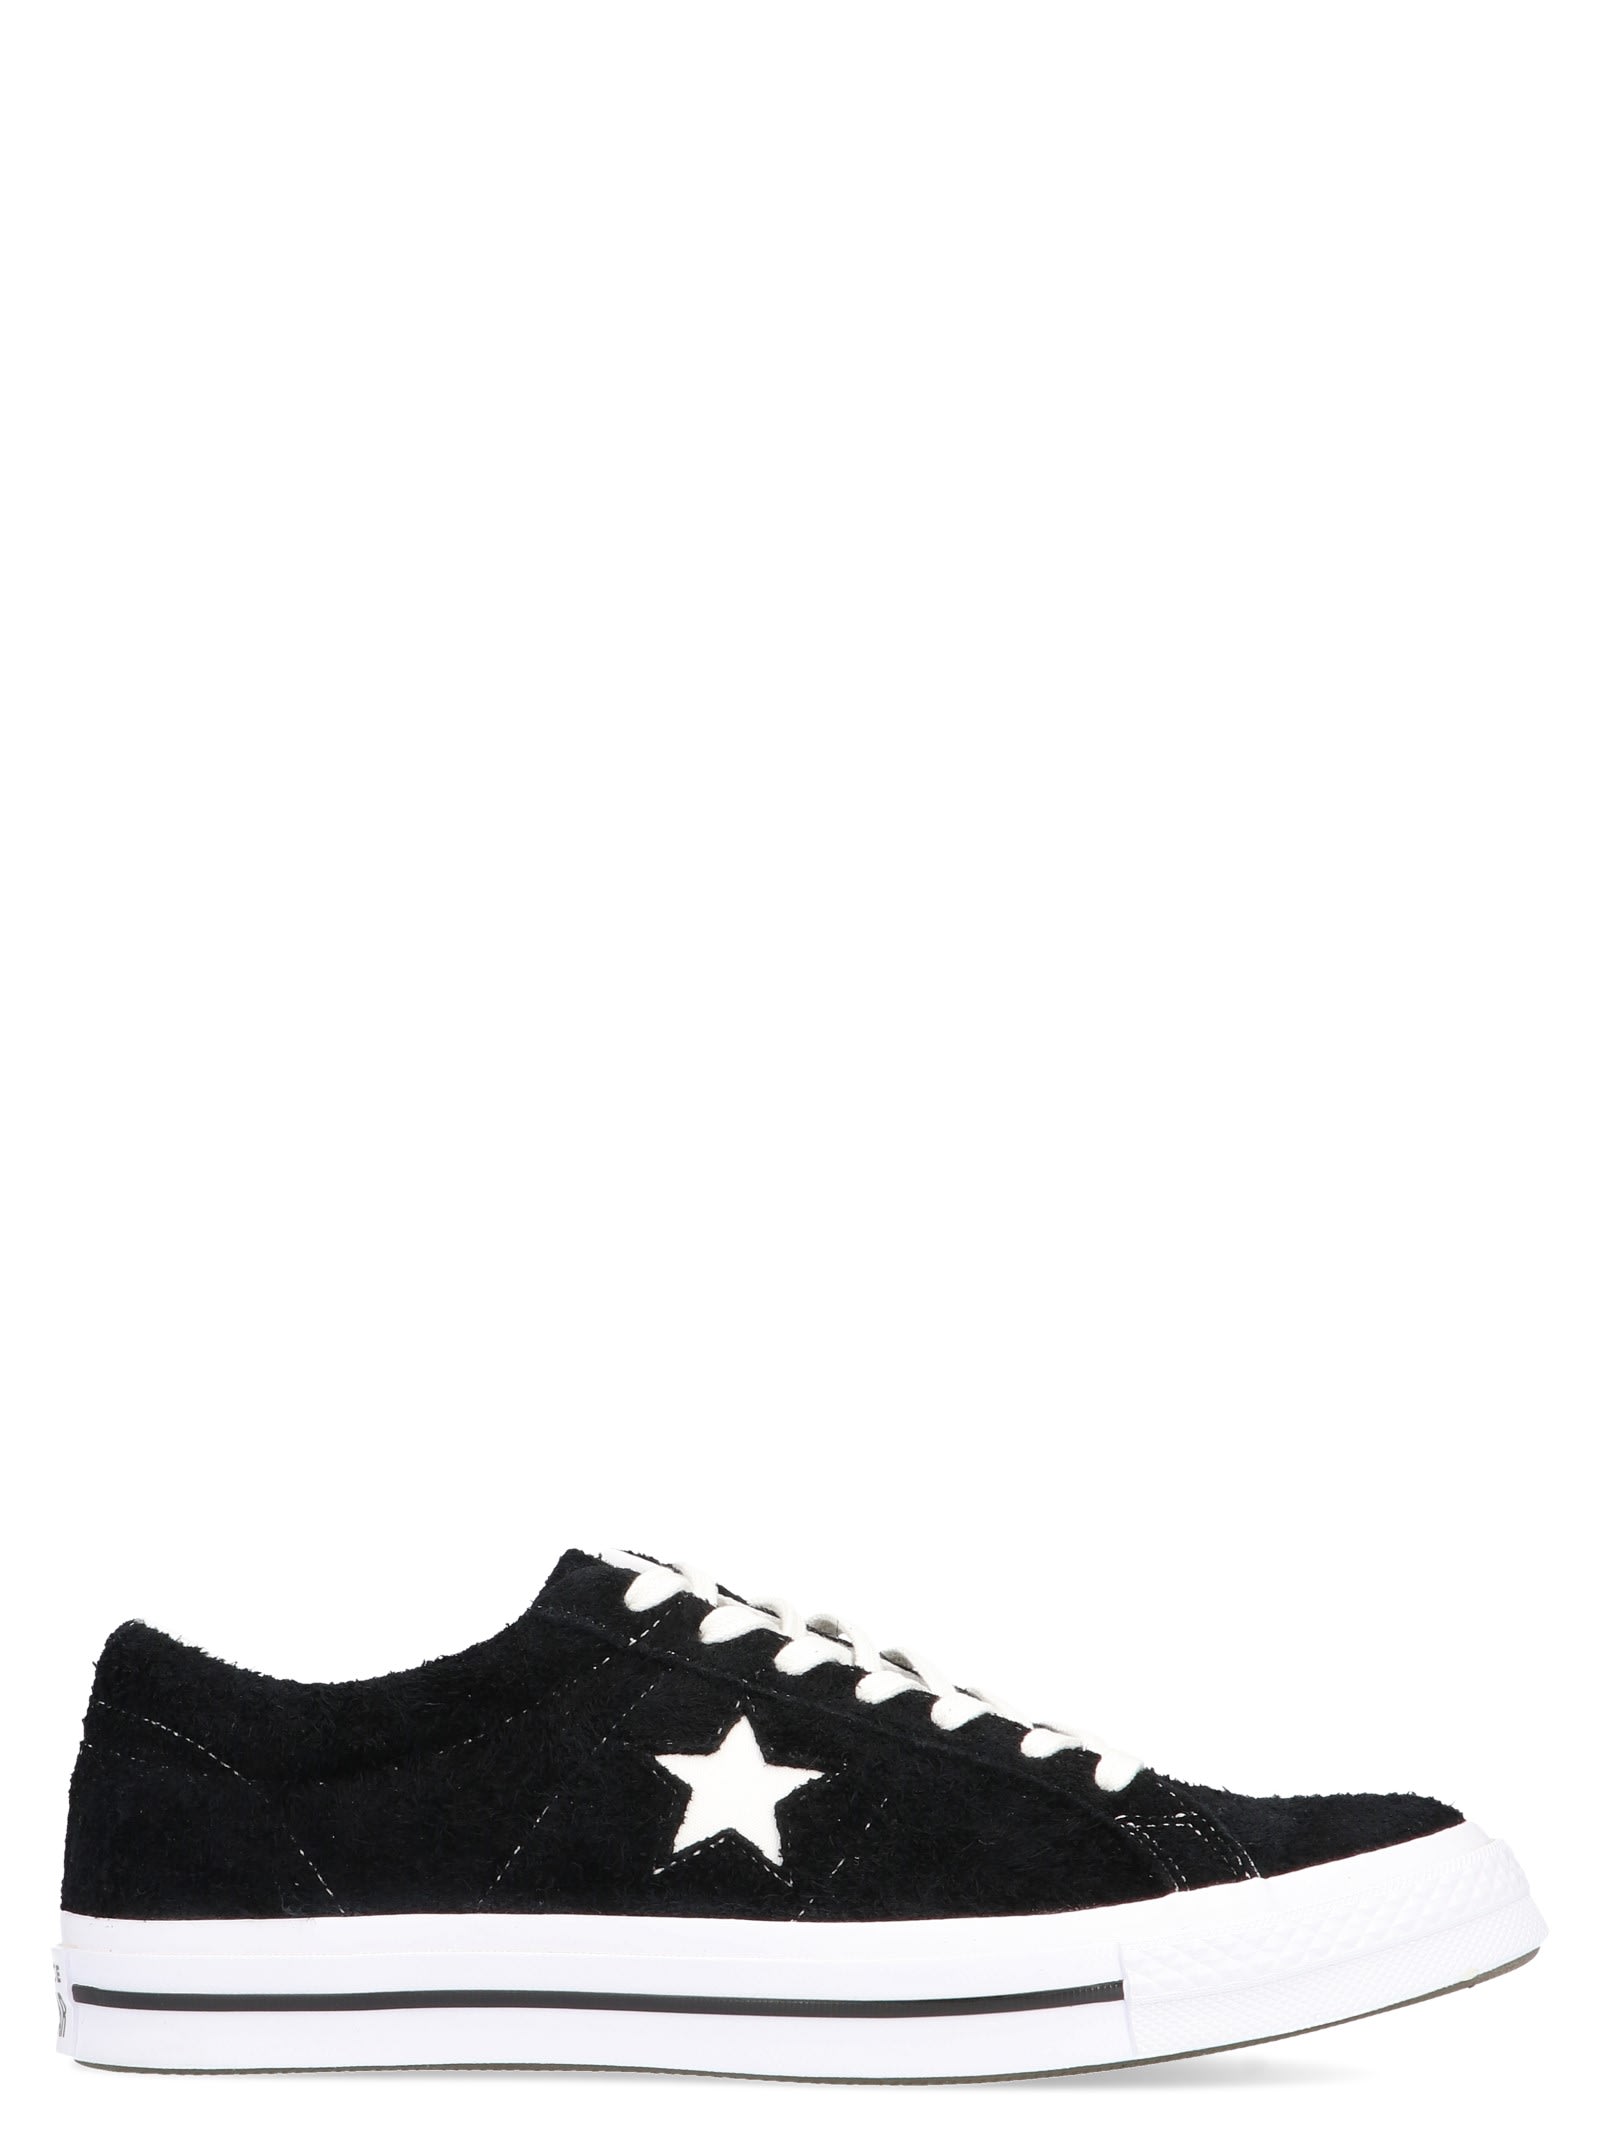 converse with star